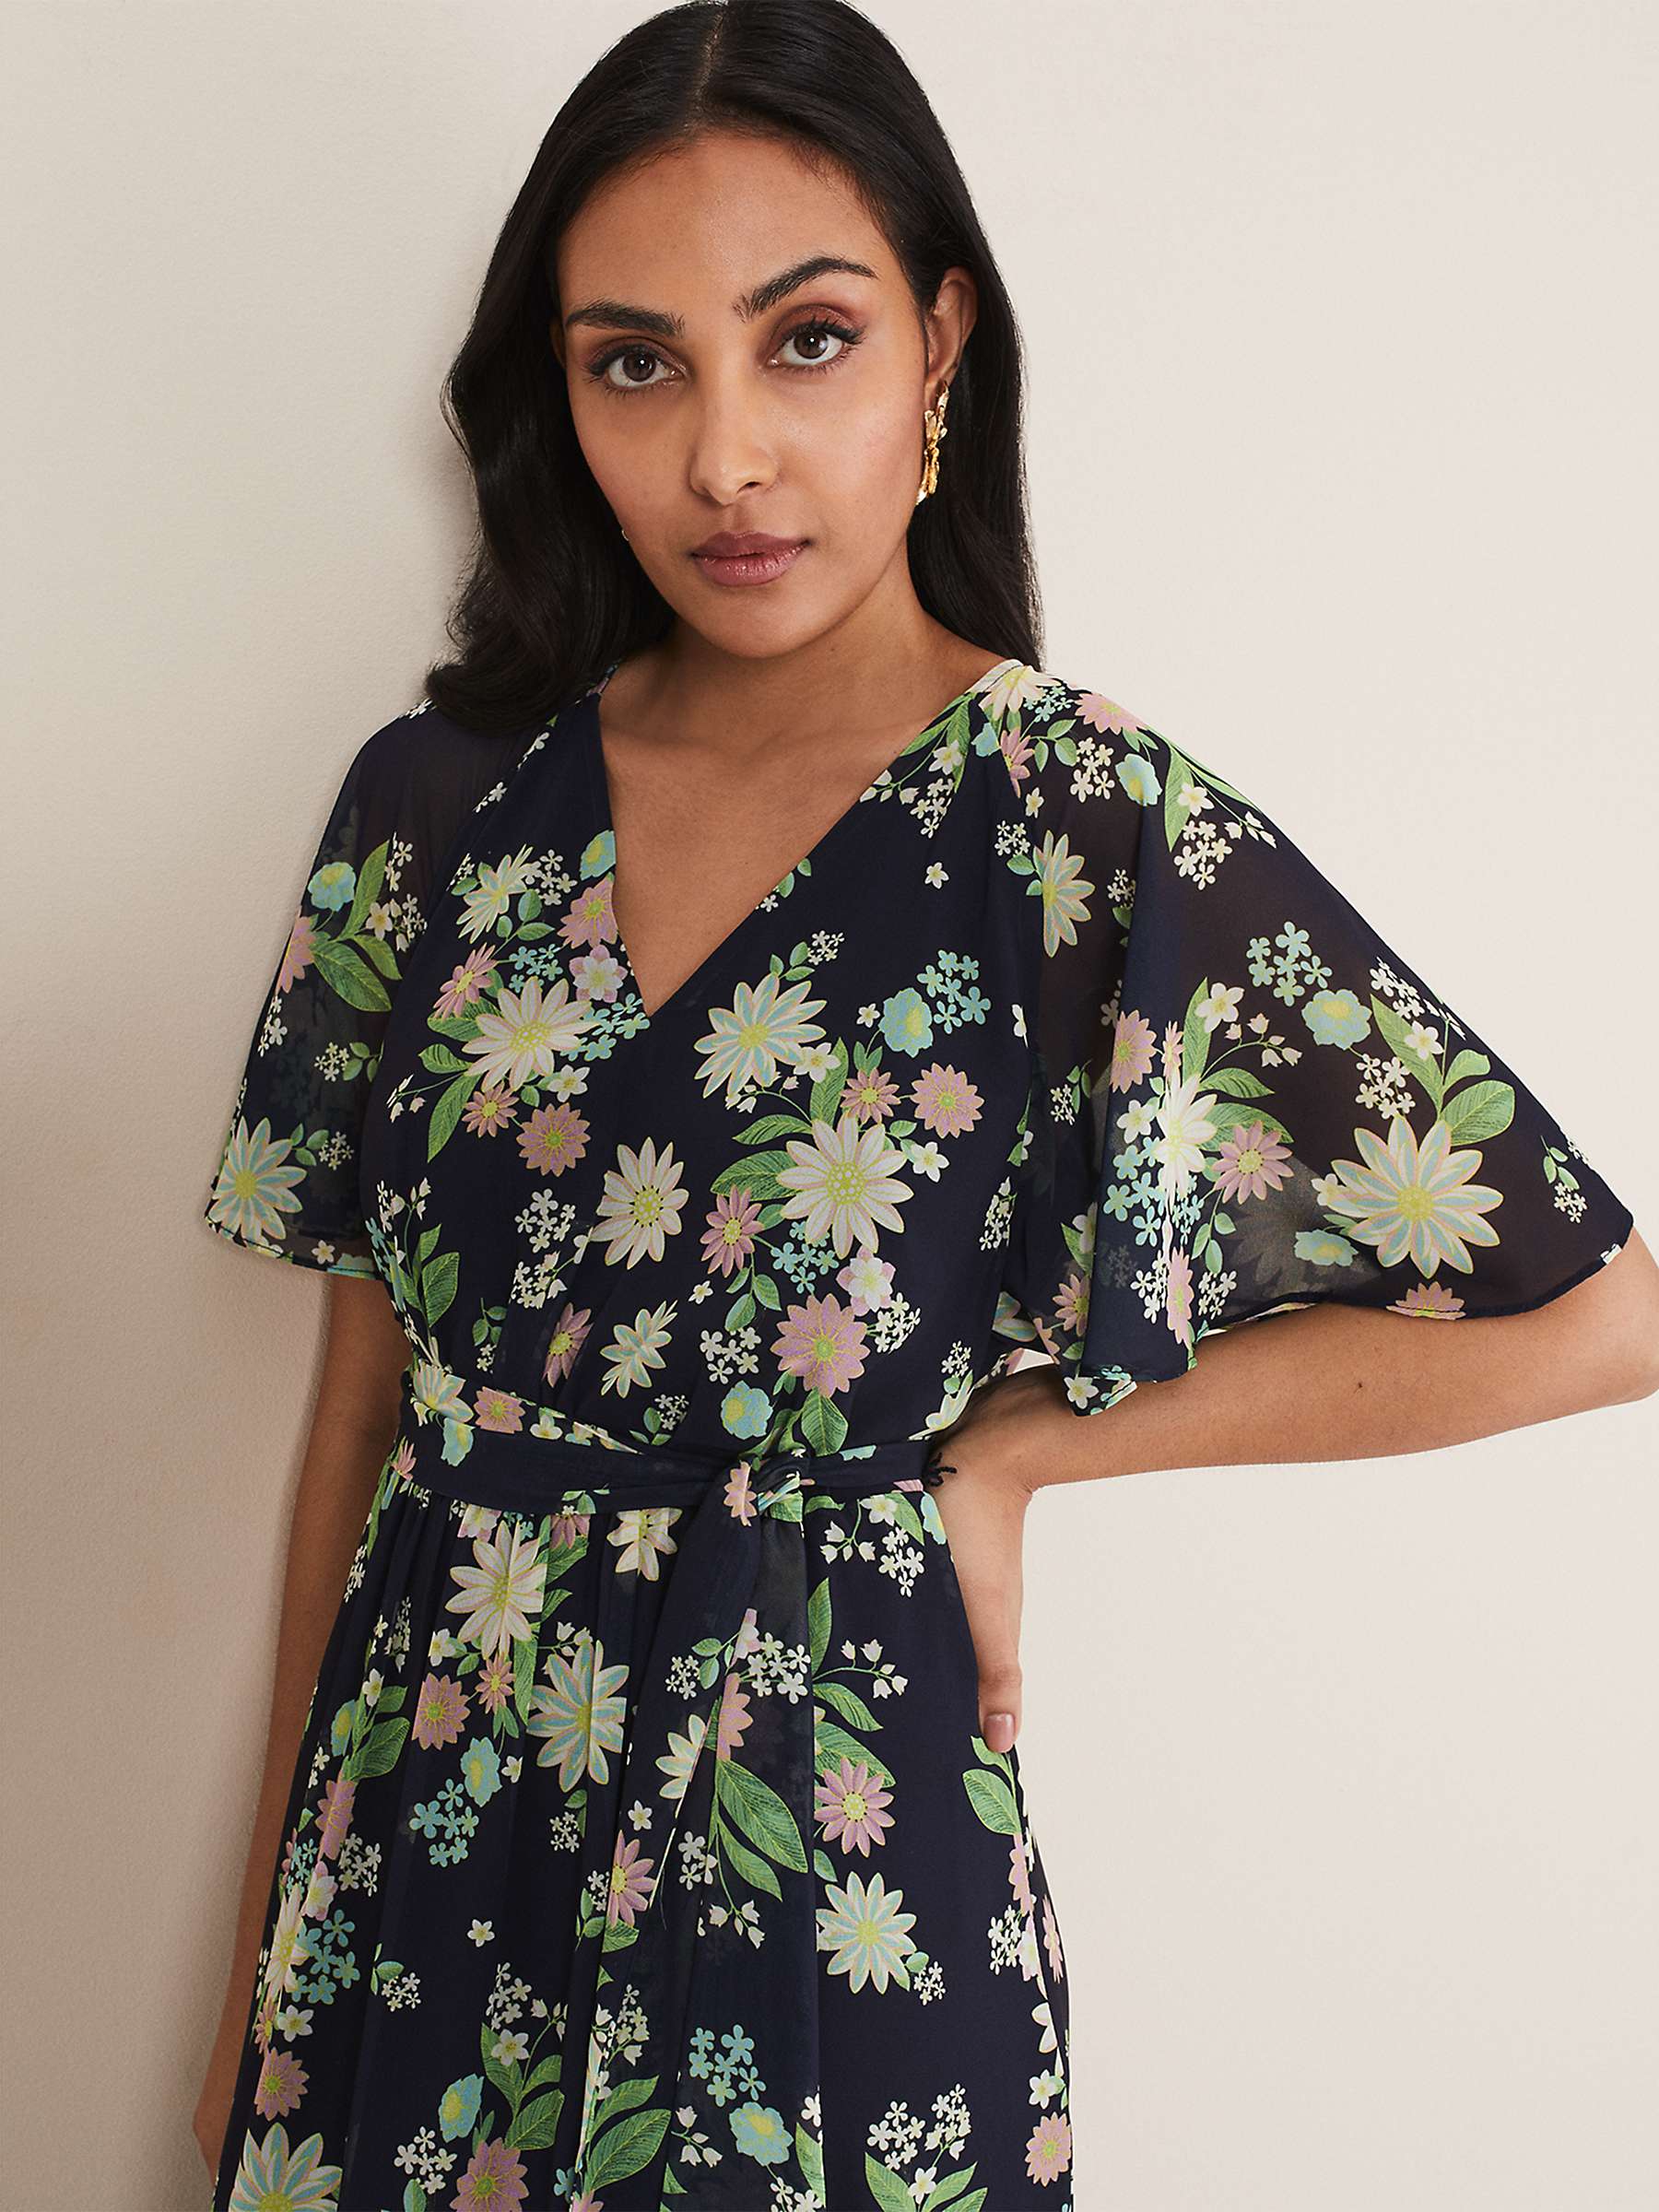 Buy Phase Eight Petite Georgie Tiered Floral Maxi Dress, Navy/Multi Online at johnlewis.com